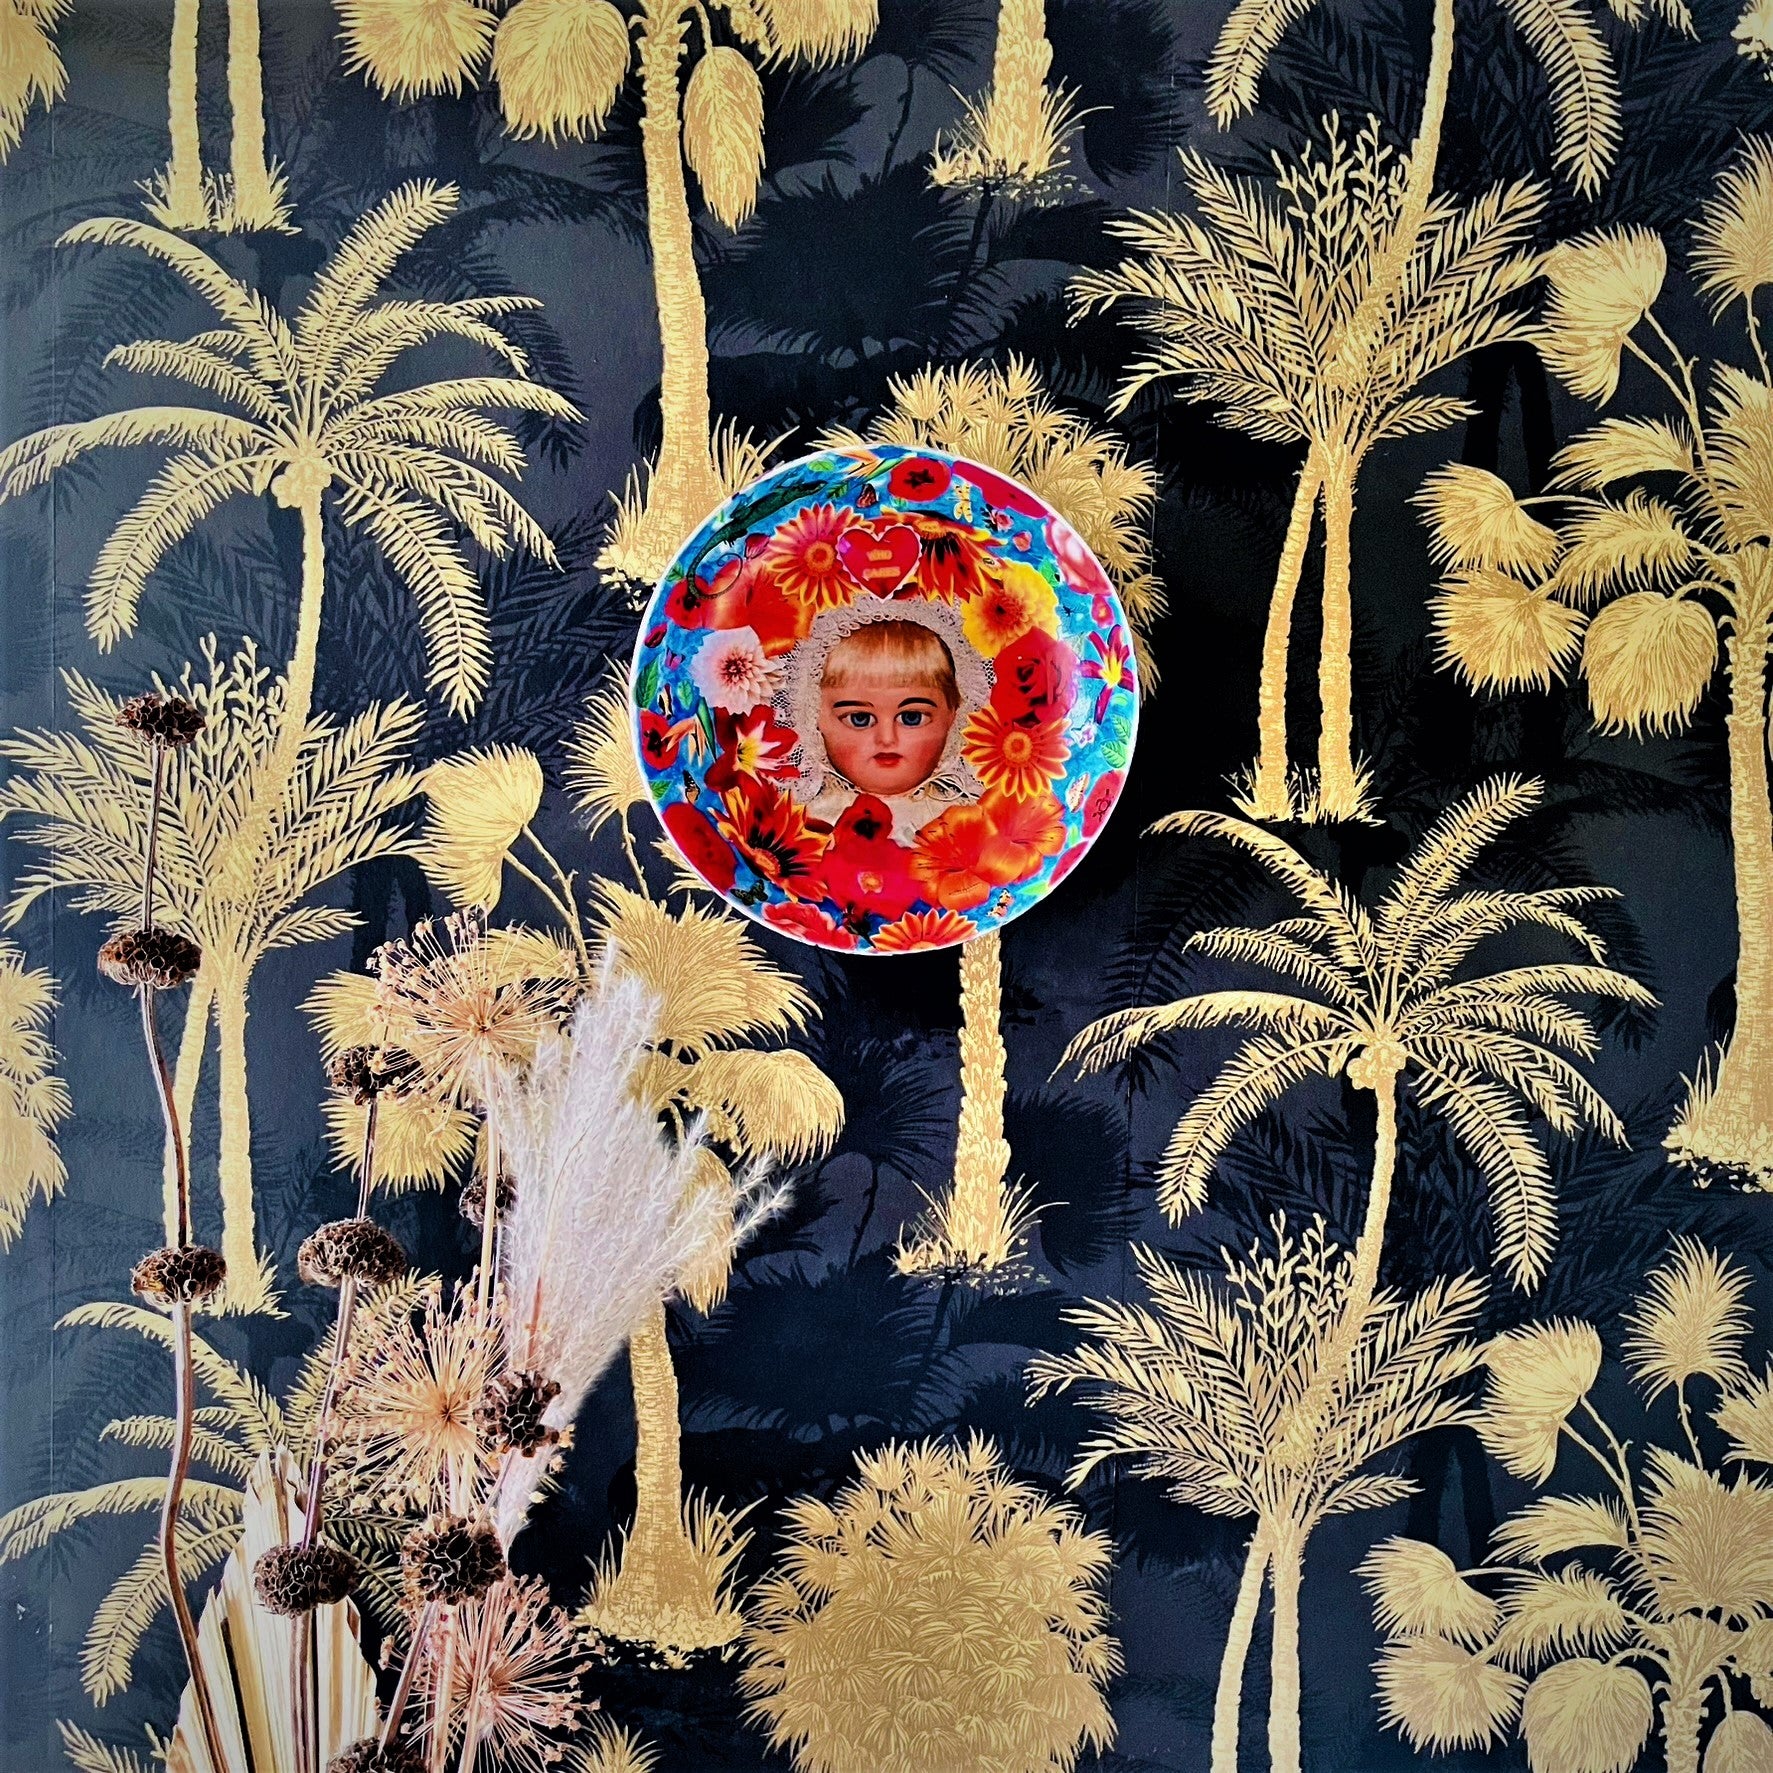 "Who Cares" Wall Plate by House of Frisson, featuring a vintage doll surrounded by flowers, moths, and a lizard, on a blue background. Plate hanging on a wall.